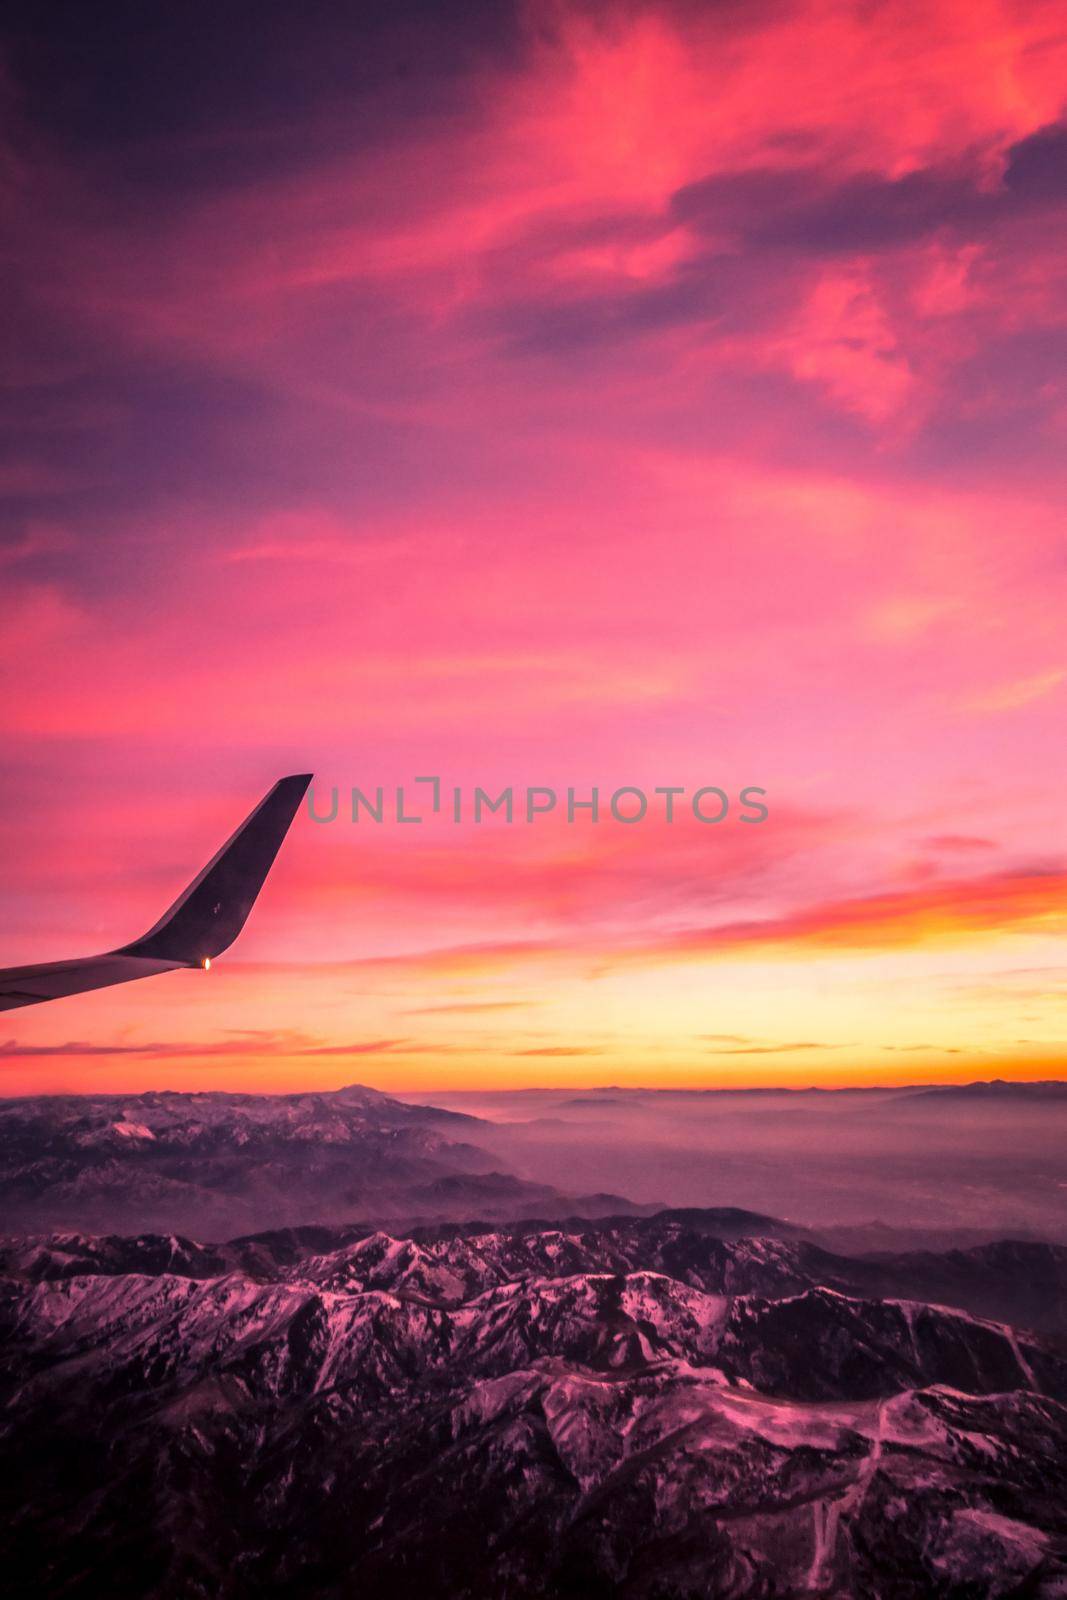 flying over rockies in airplane from salt lake city at sunset by digidreamgrafix